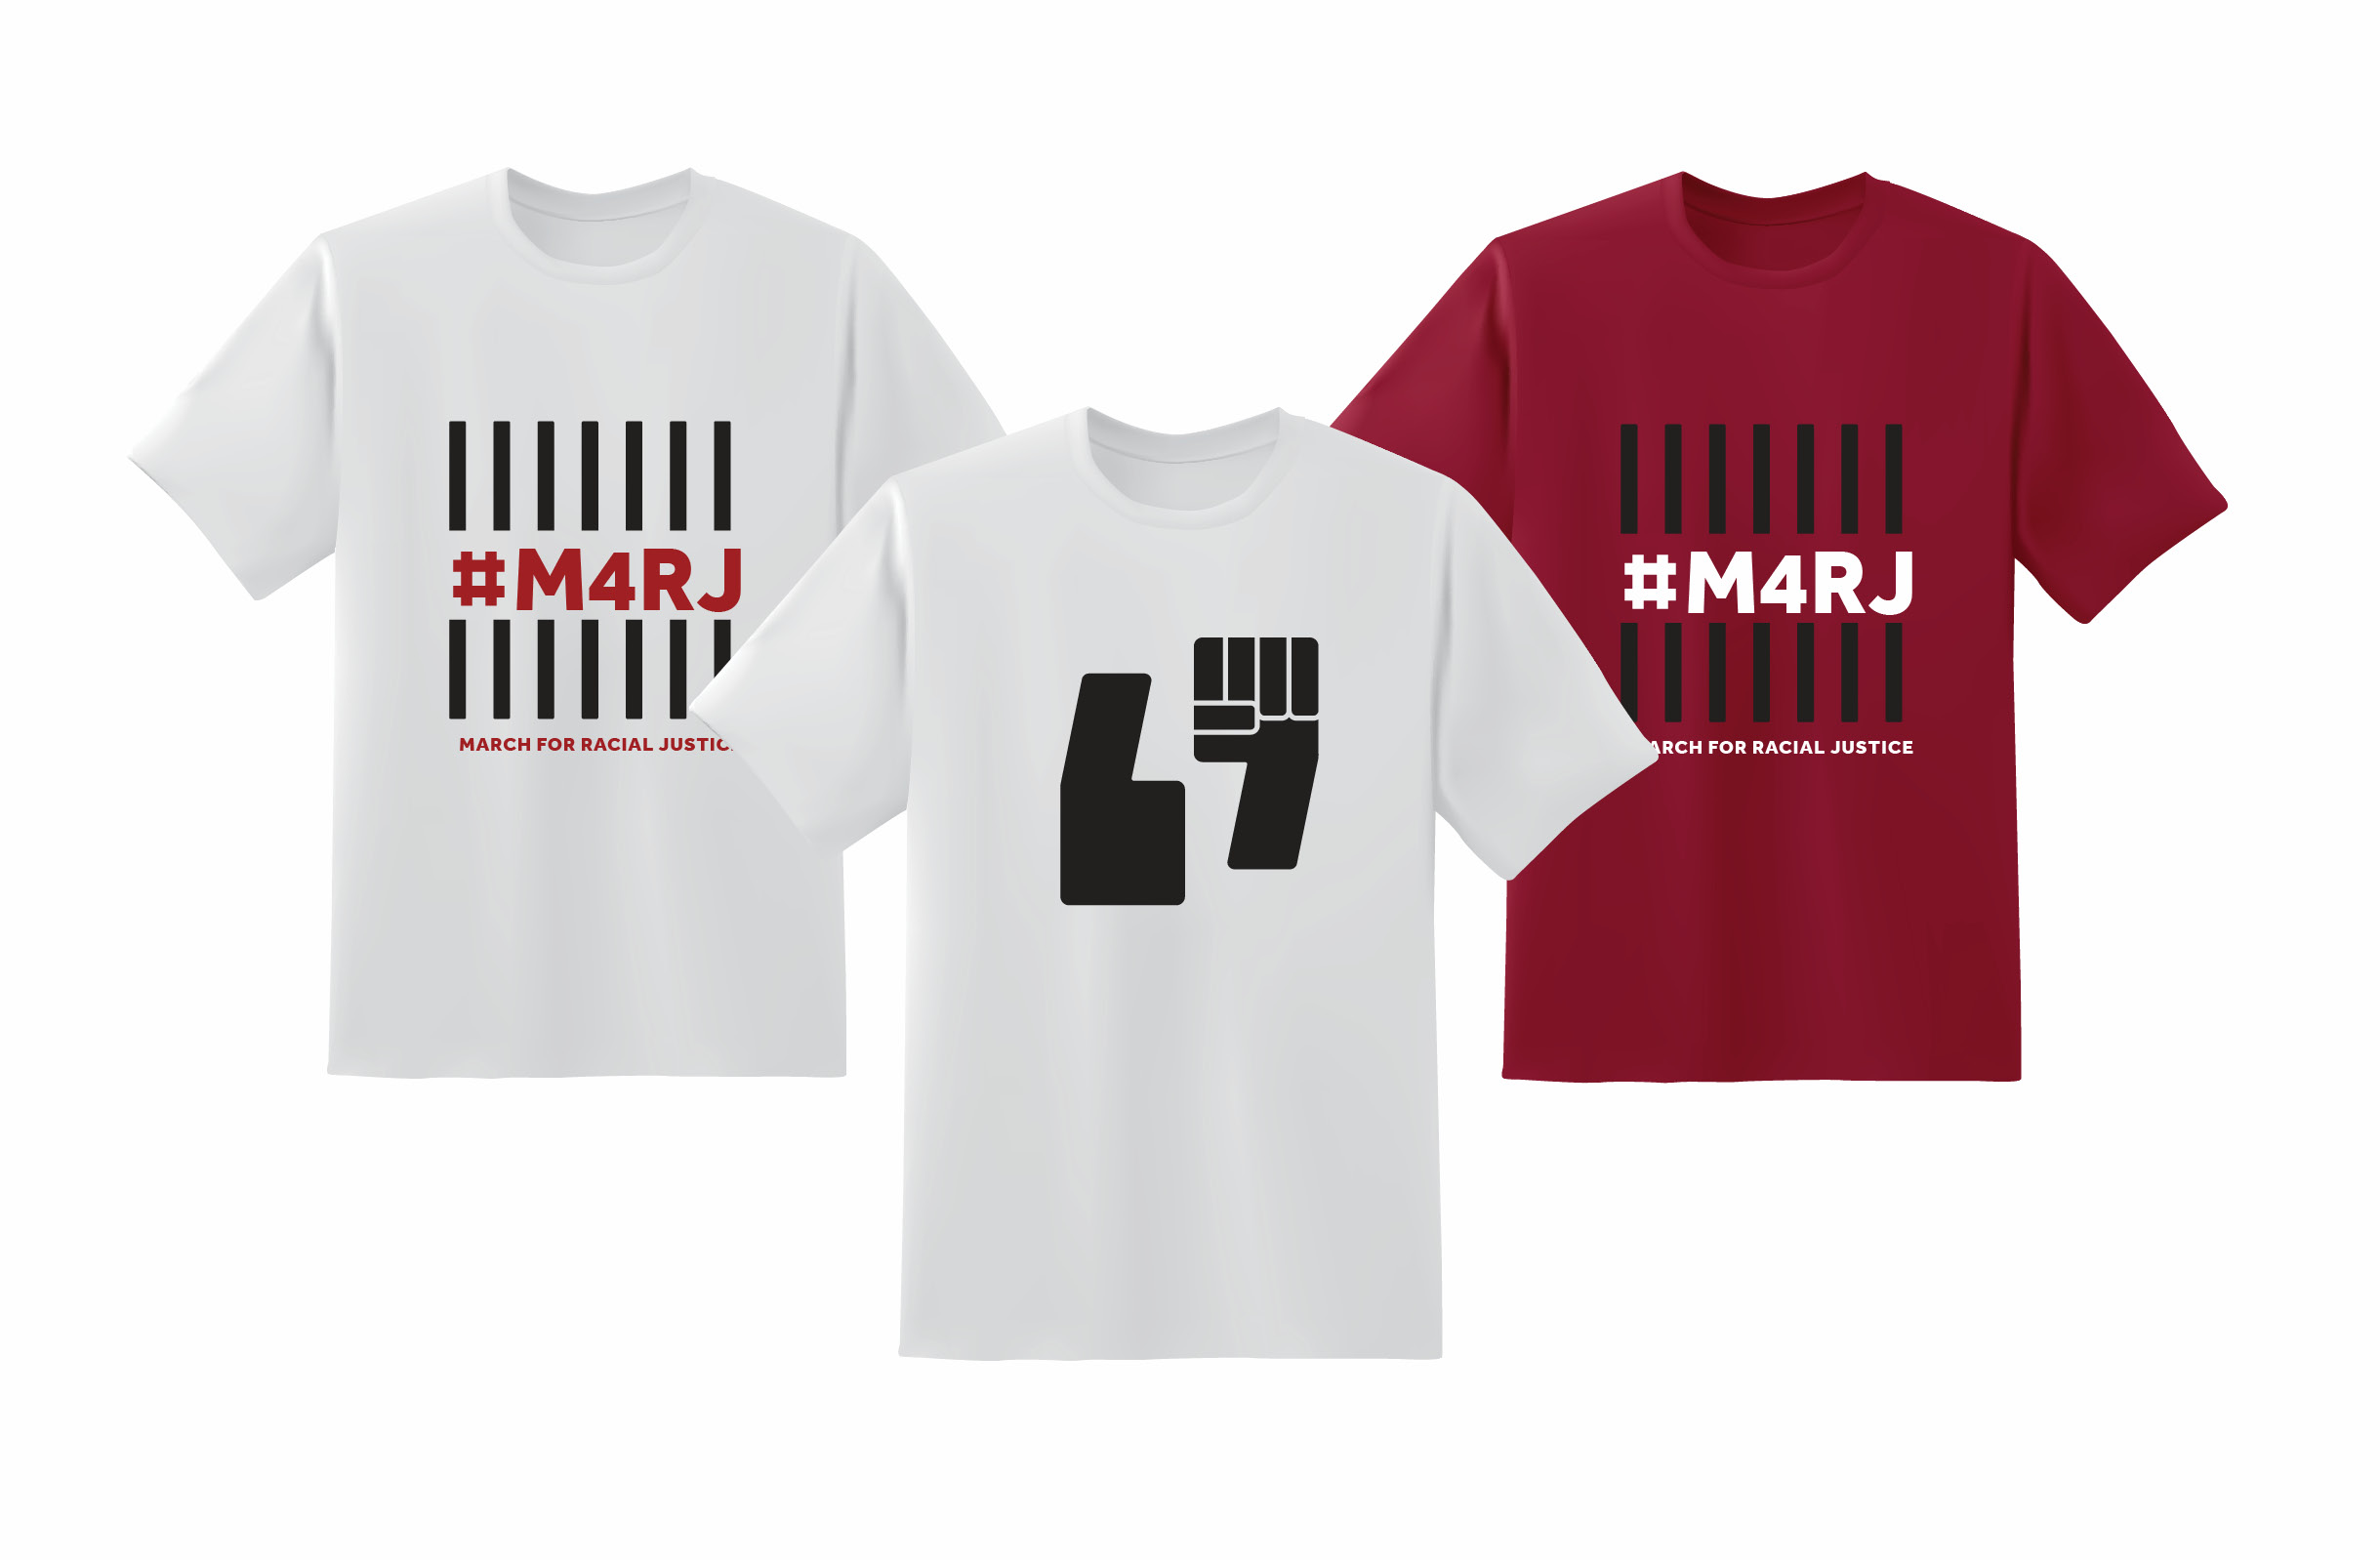 A set of 3 t-shirt designs created for M4RJ: First is white with red “#M4RJ” large across the chest, in between black bars. Second is a white shirt with the March for Racial Justice logo mark fists in Black. The third is similar to the first but a red shirt with white lettering.